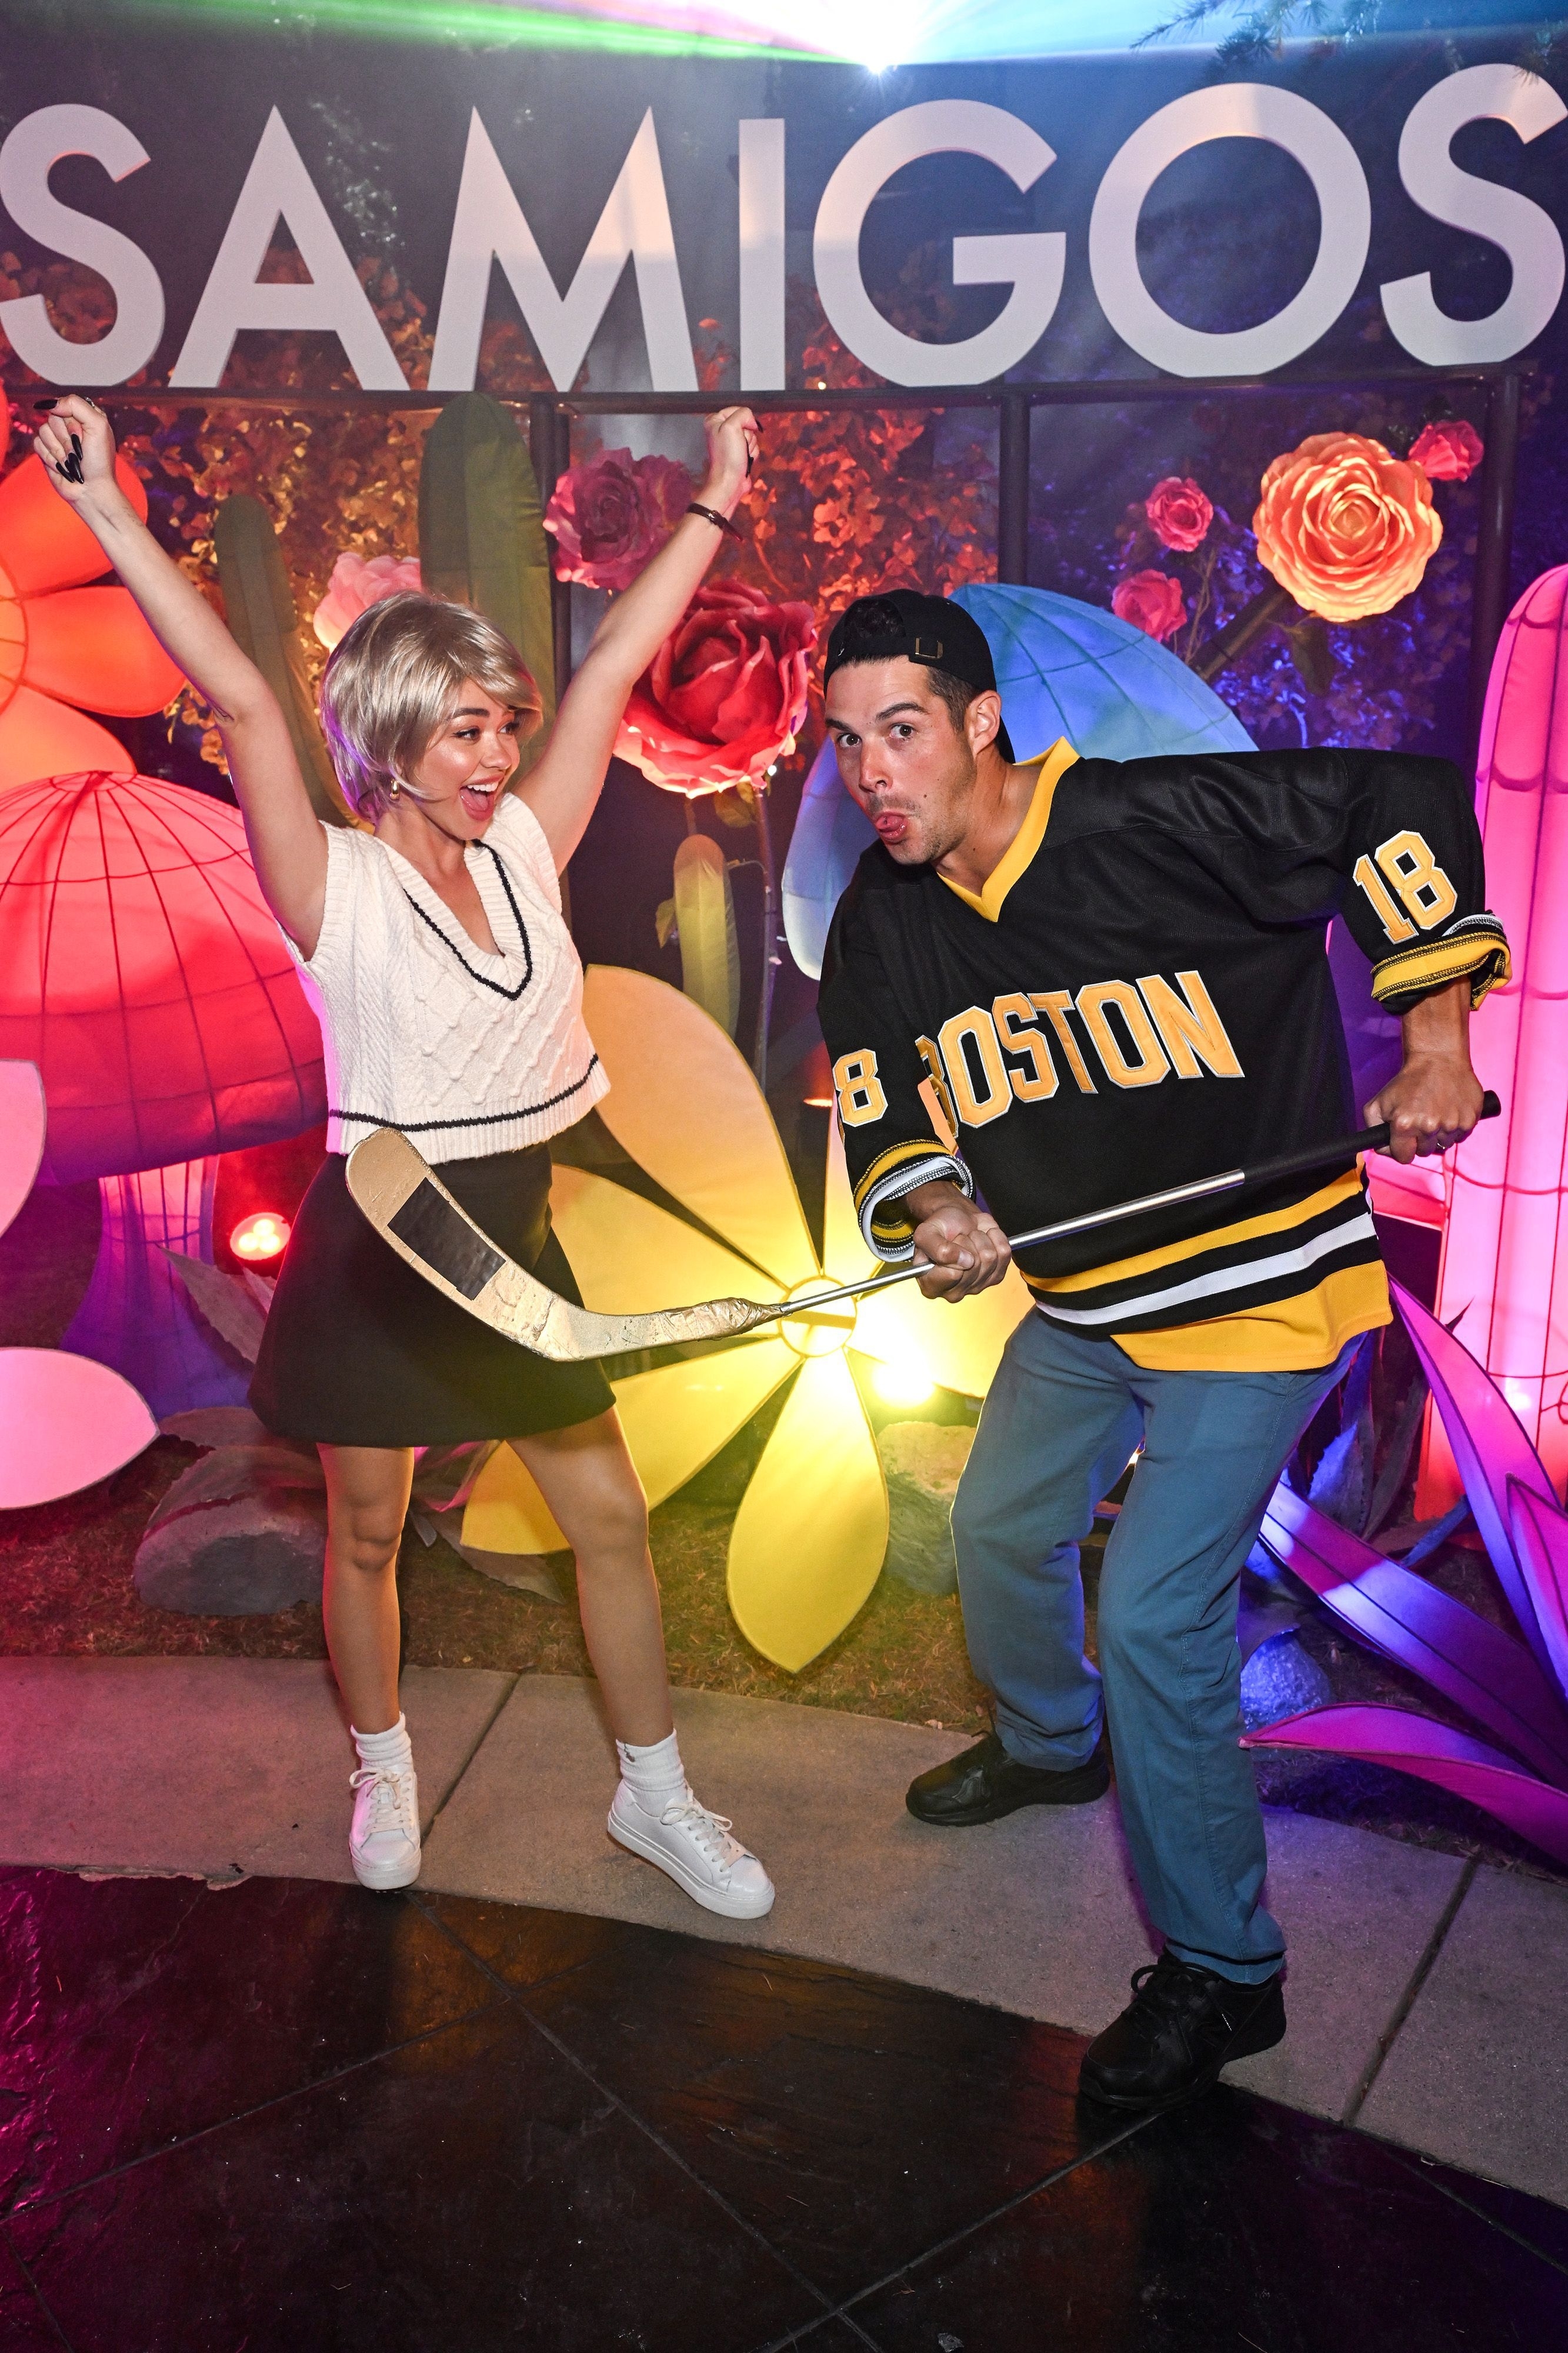 she cheers in a short blonde wig as he holds a hockey stick